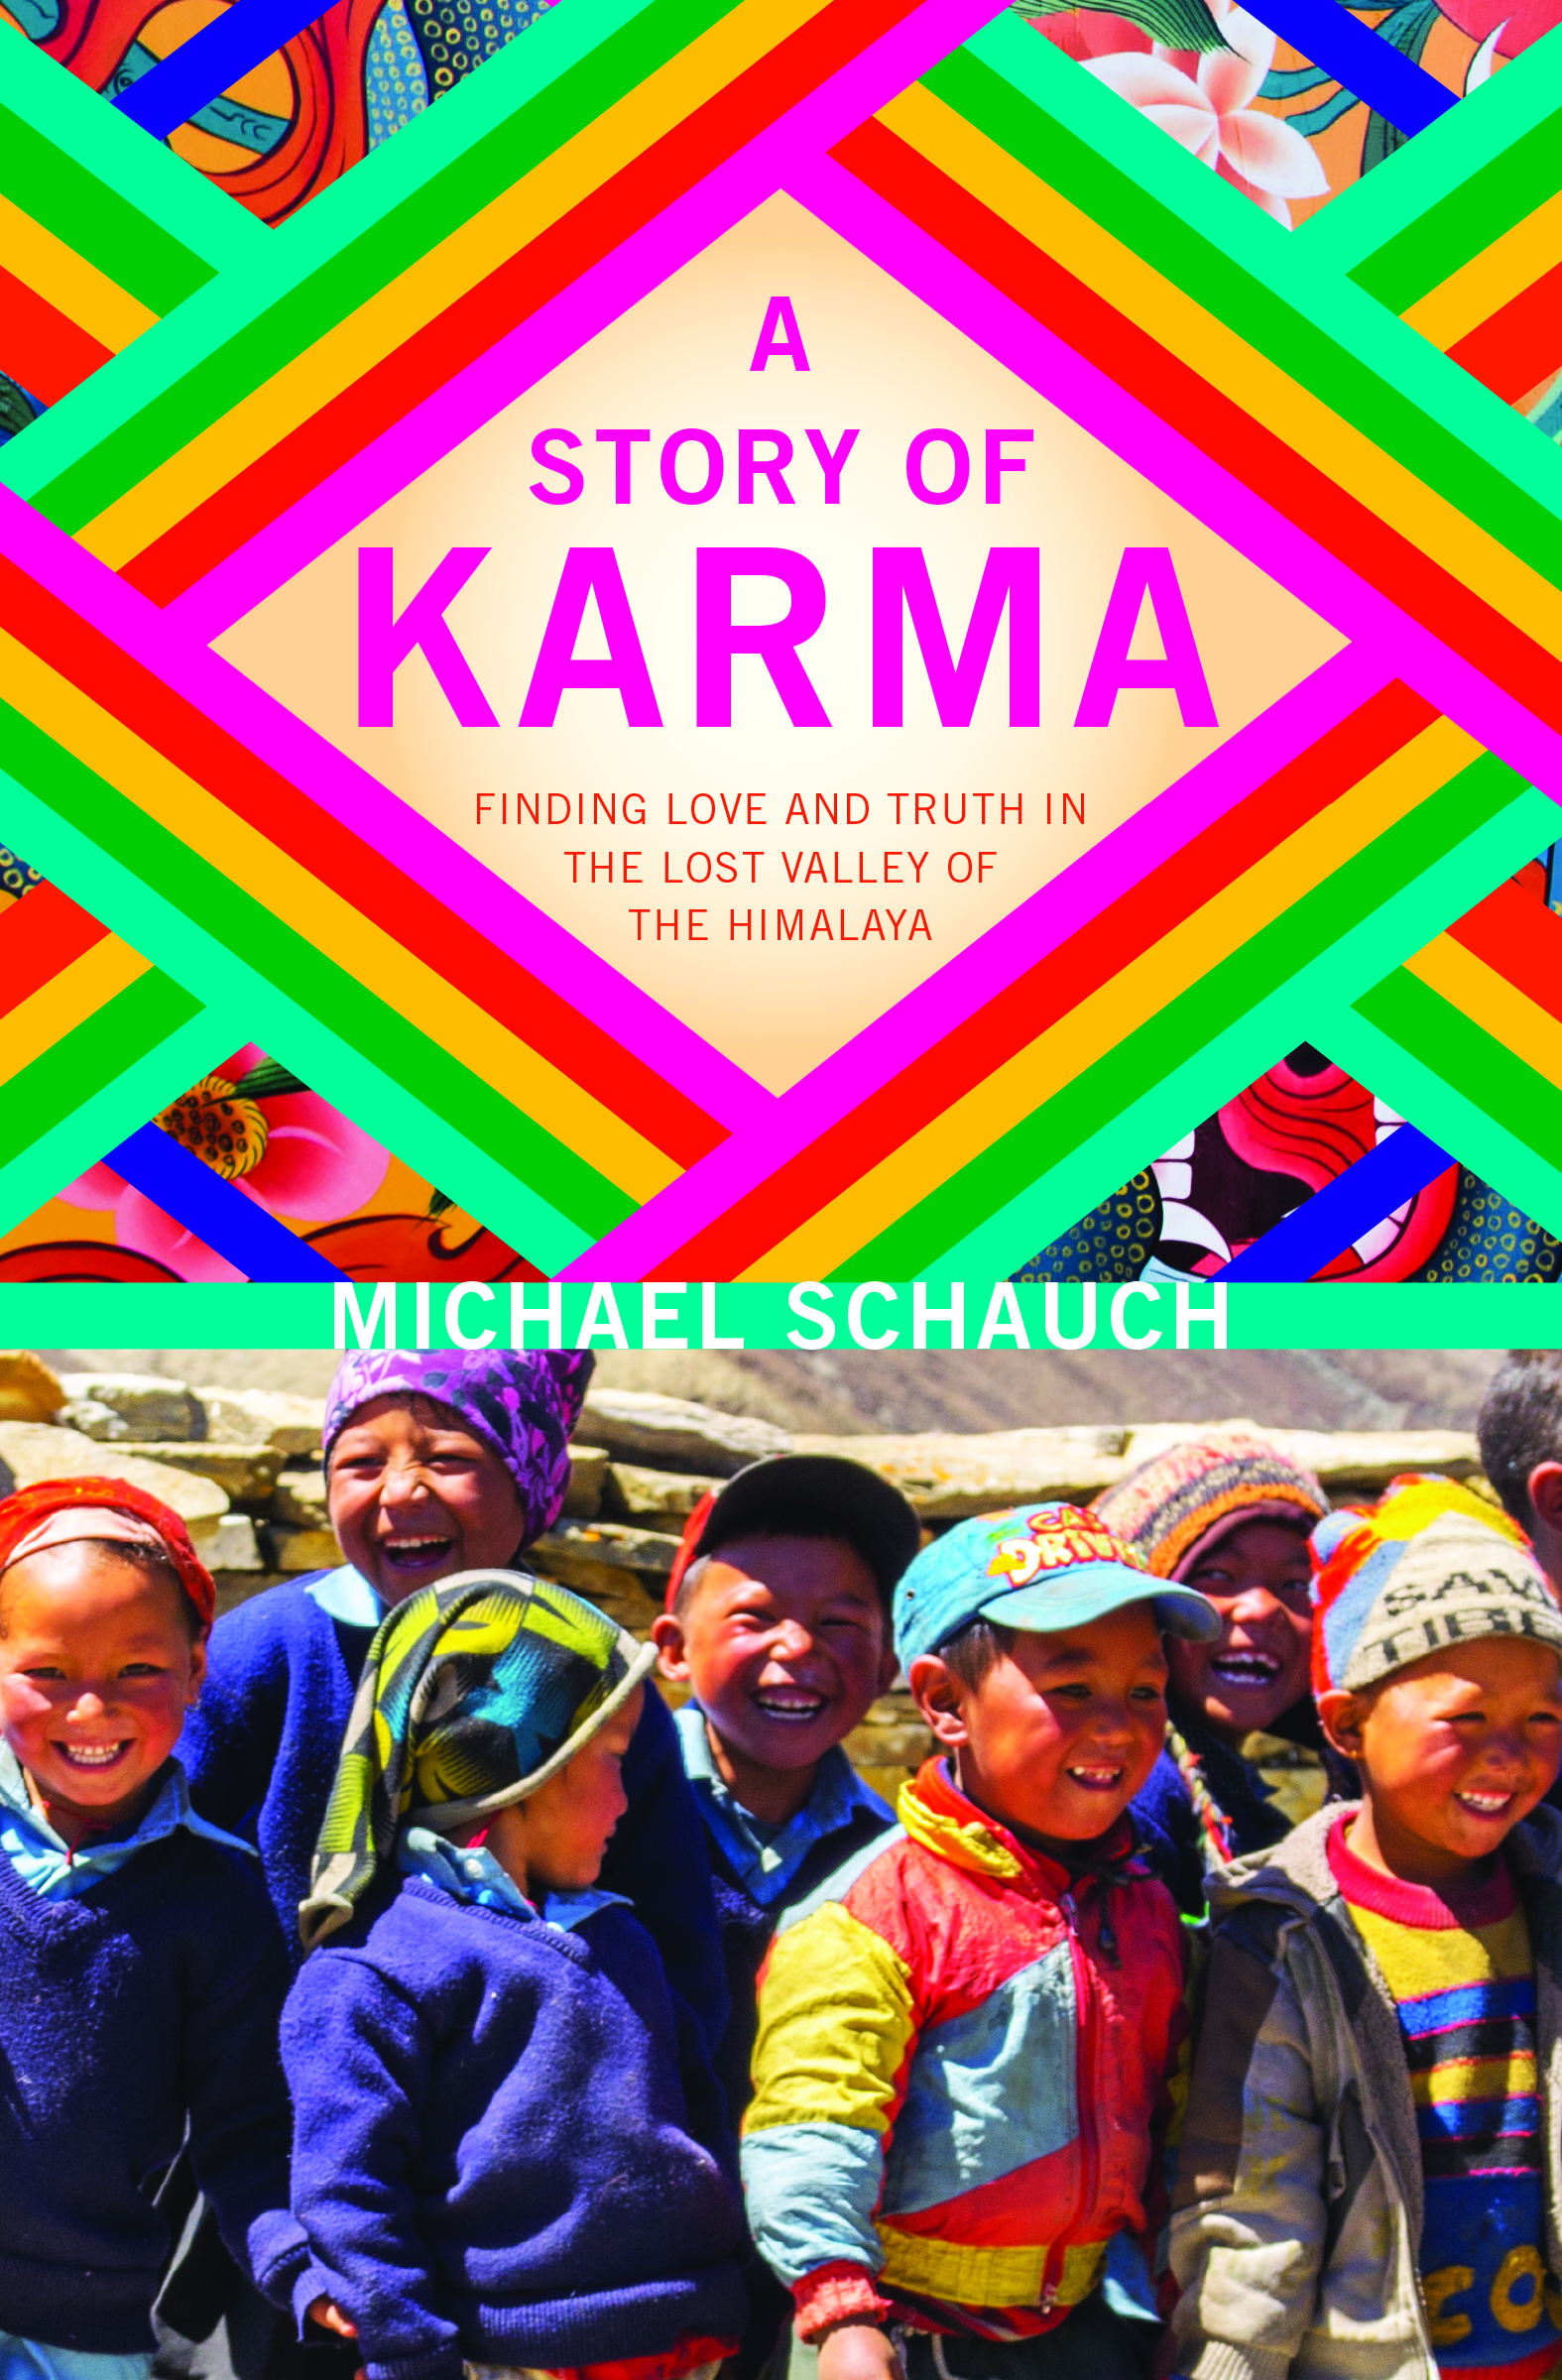 A Story of Karma - Finding Love and Truth in the Lost Valley of the Himalaya